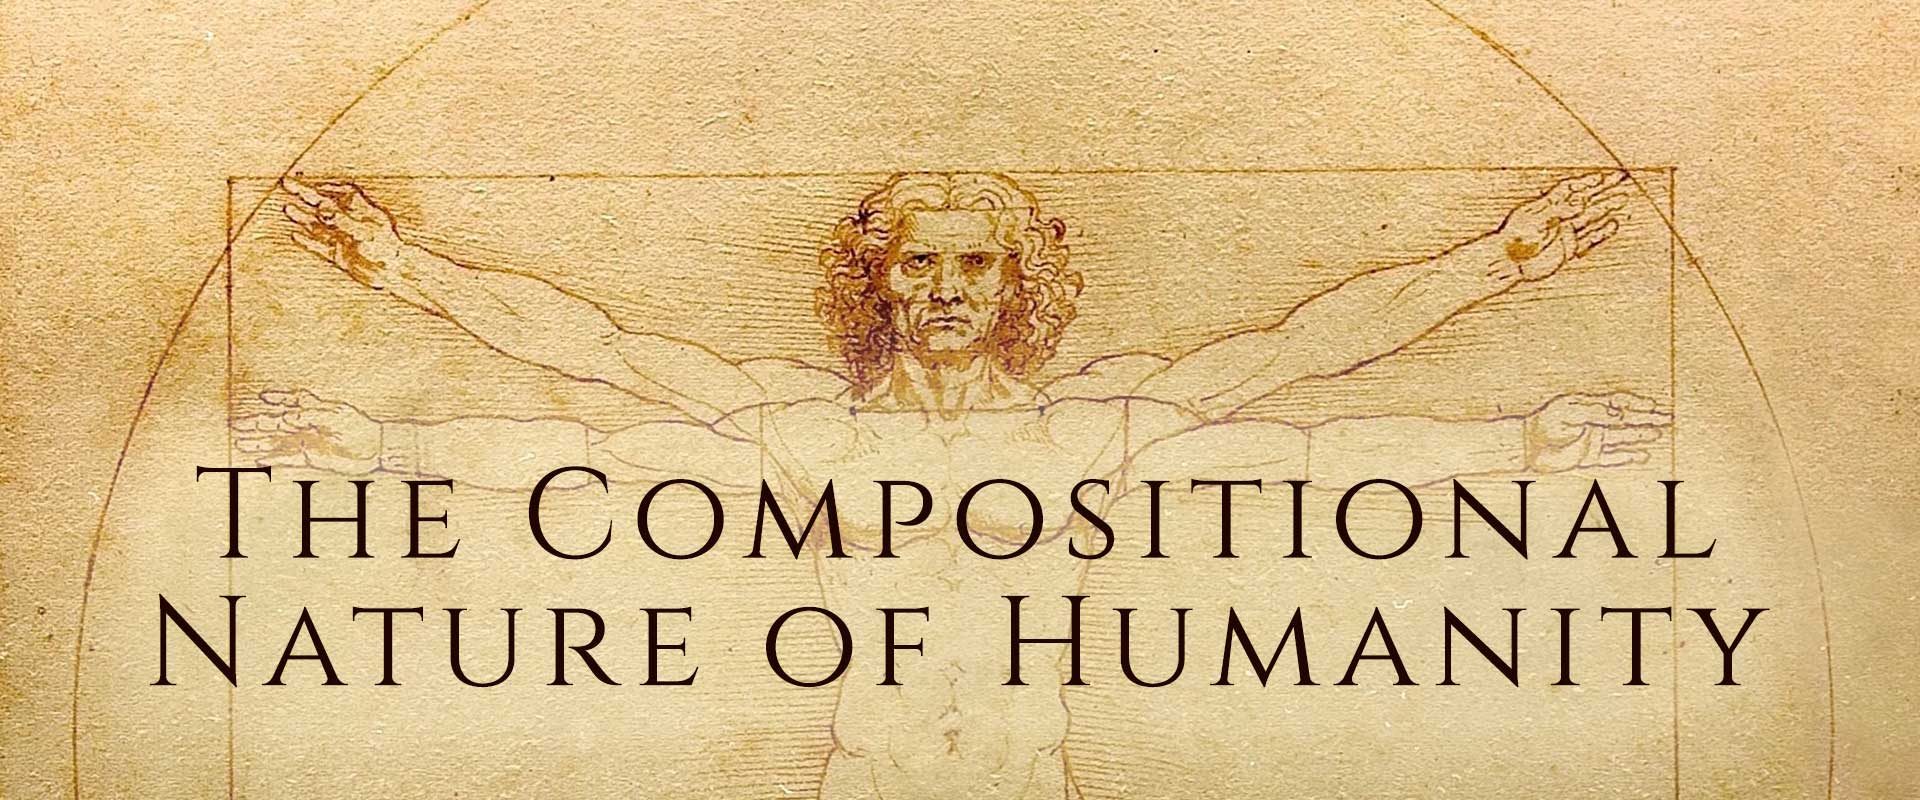 Volume IV: The Compositional Nature of Humanity